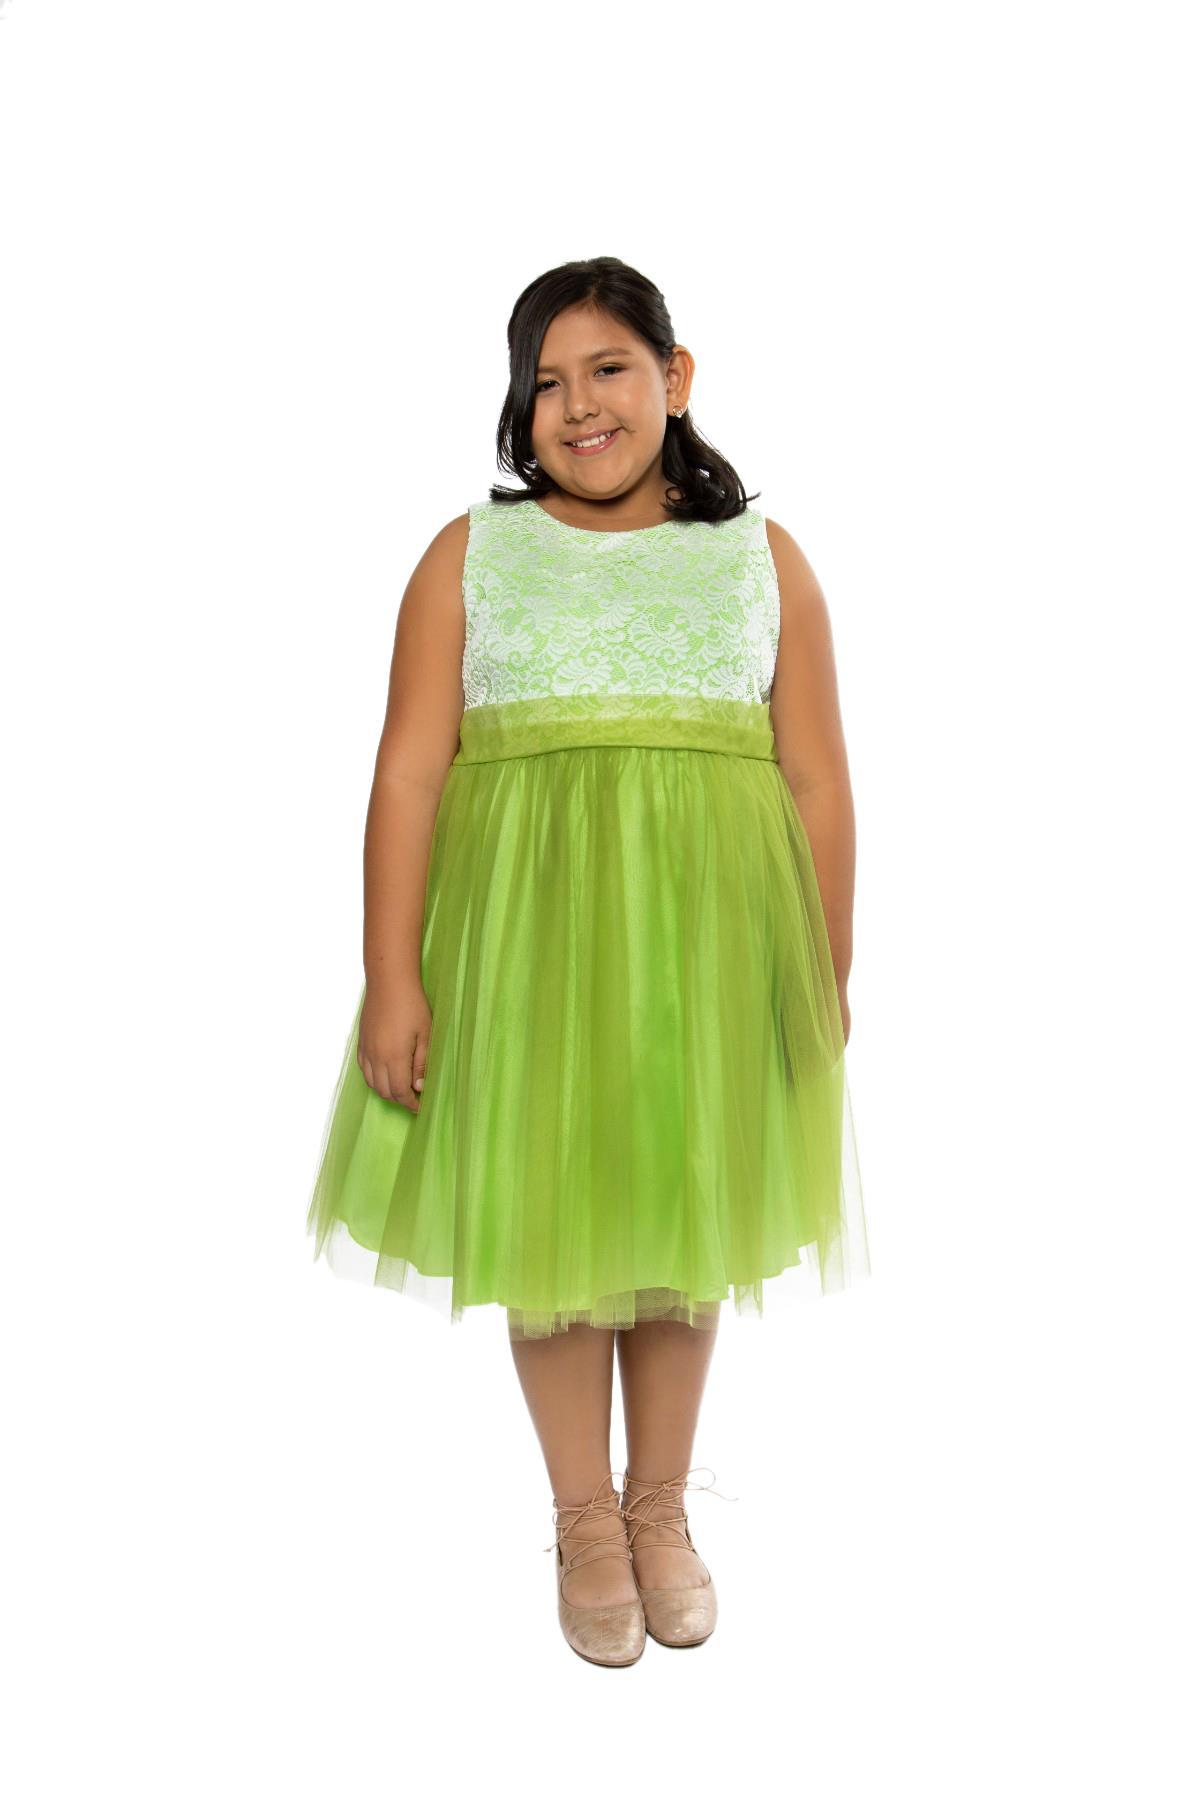 Dress - Stretch Lace Tulle Plus Size Girl Dress